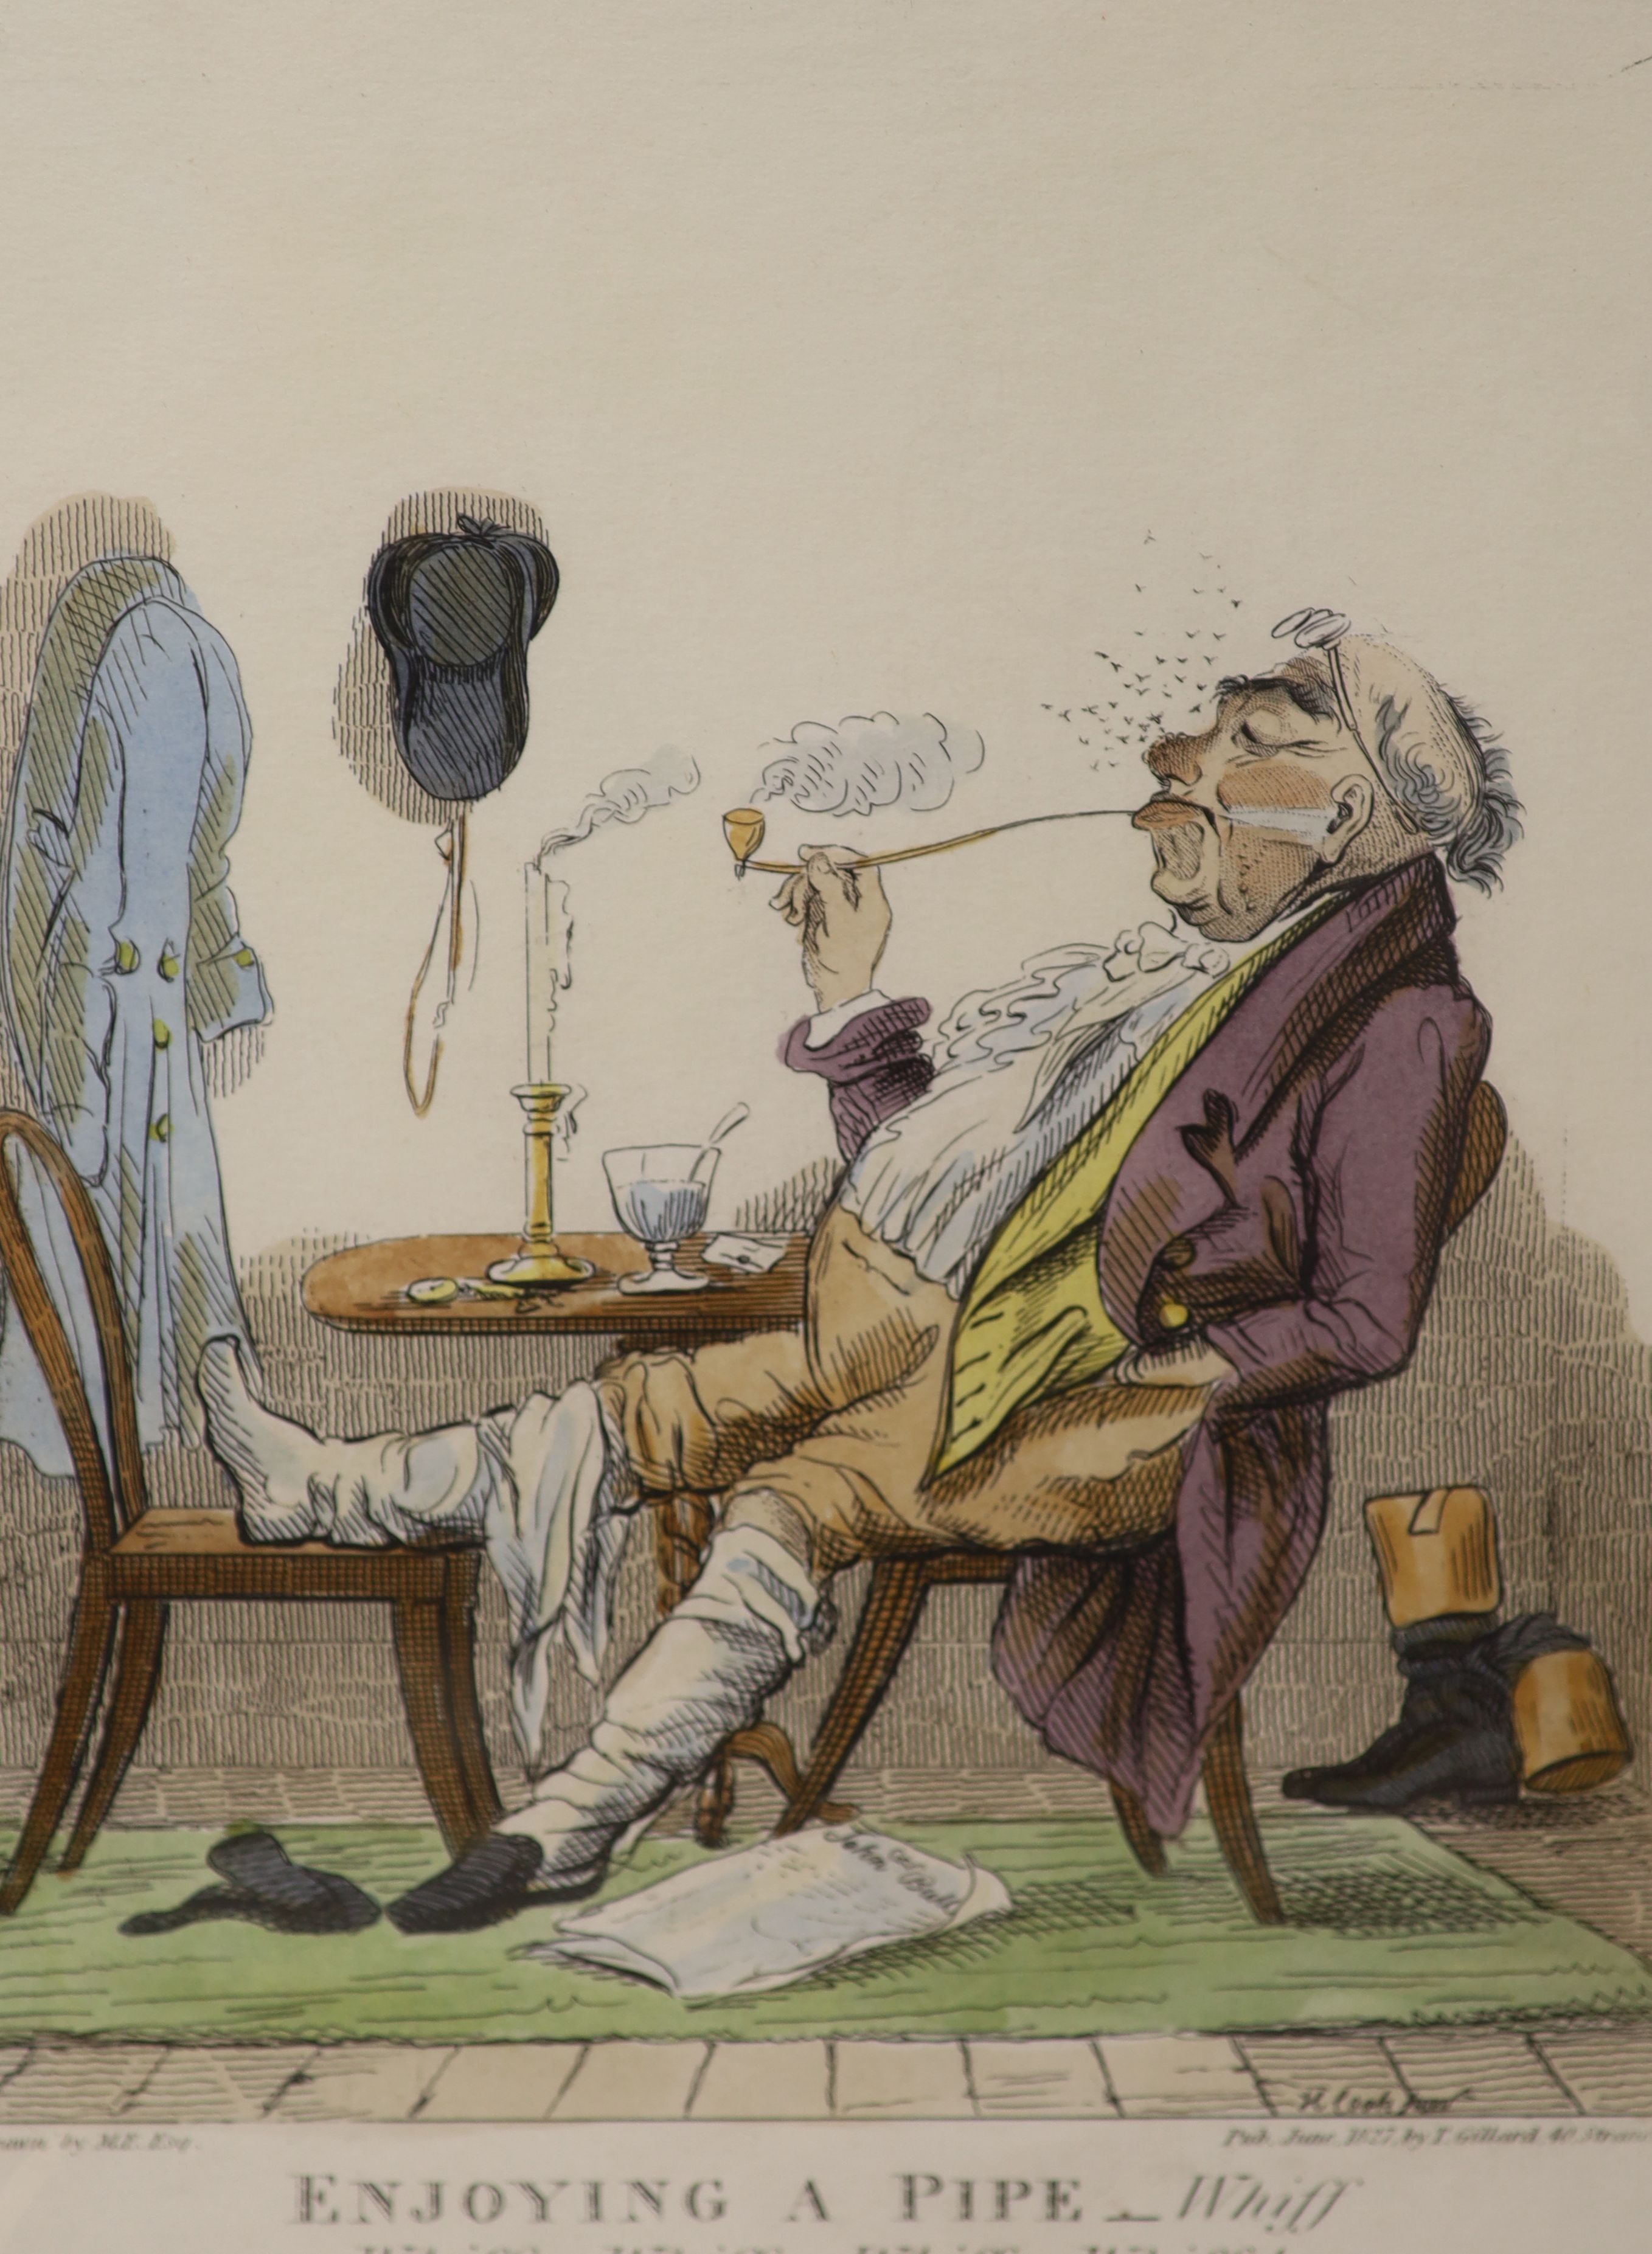 Two 19th century caricatures, 'Enjoying a pipe' and 'Swallowing a pill' (reprints), 28 x 23cm